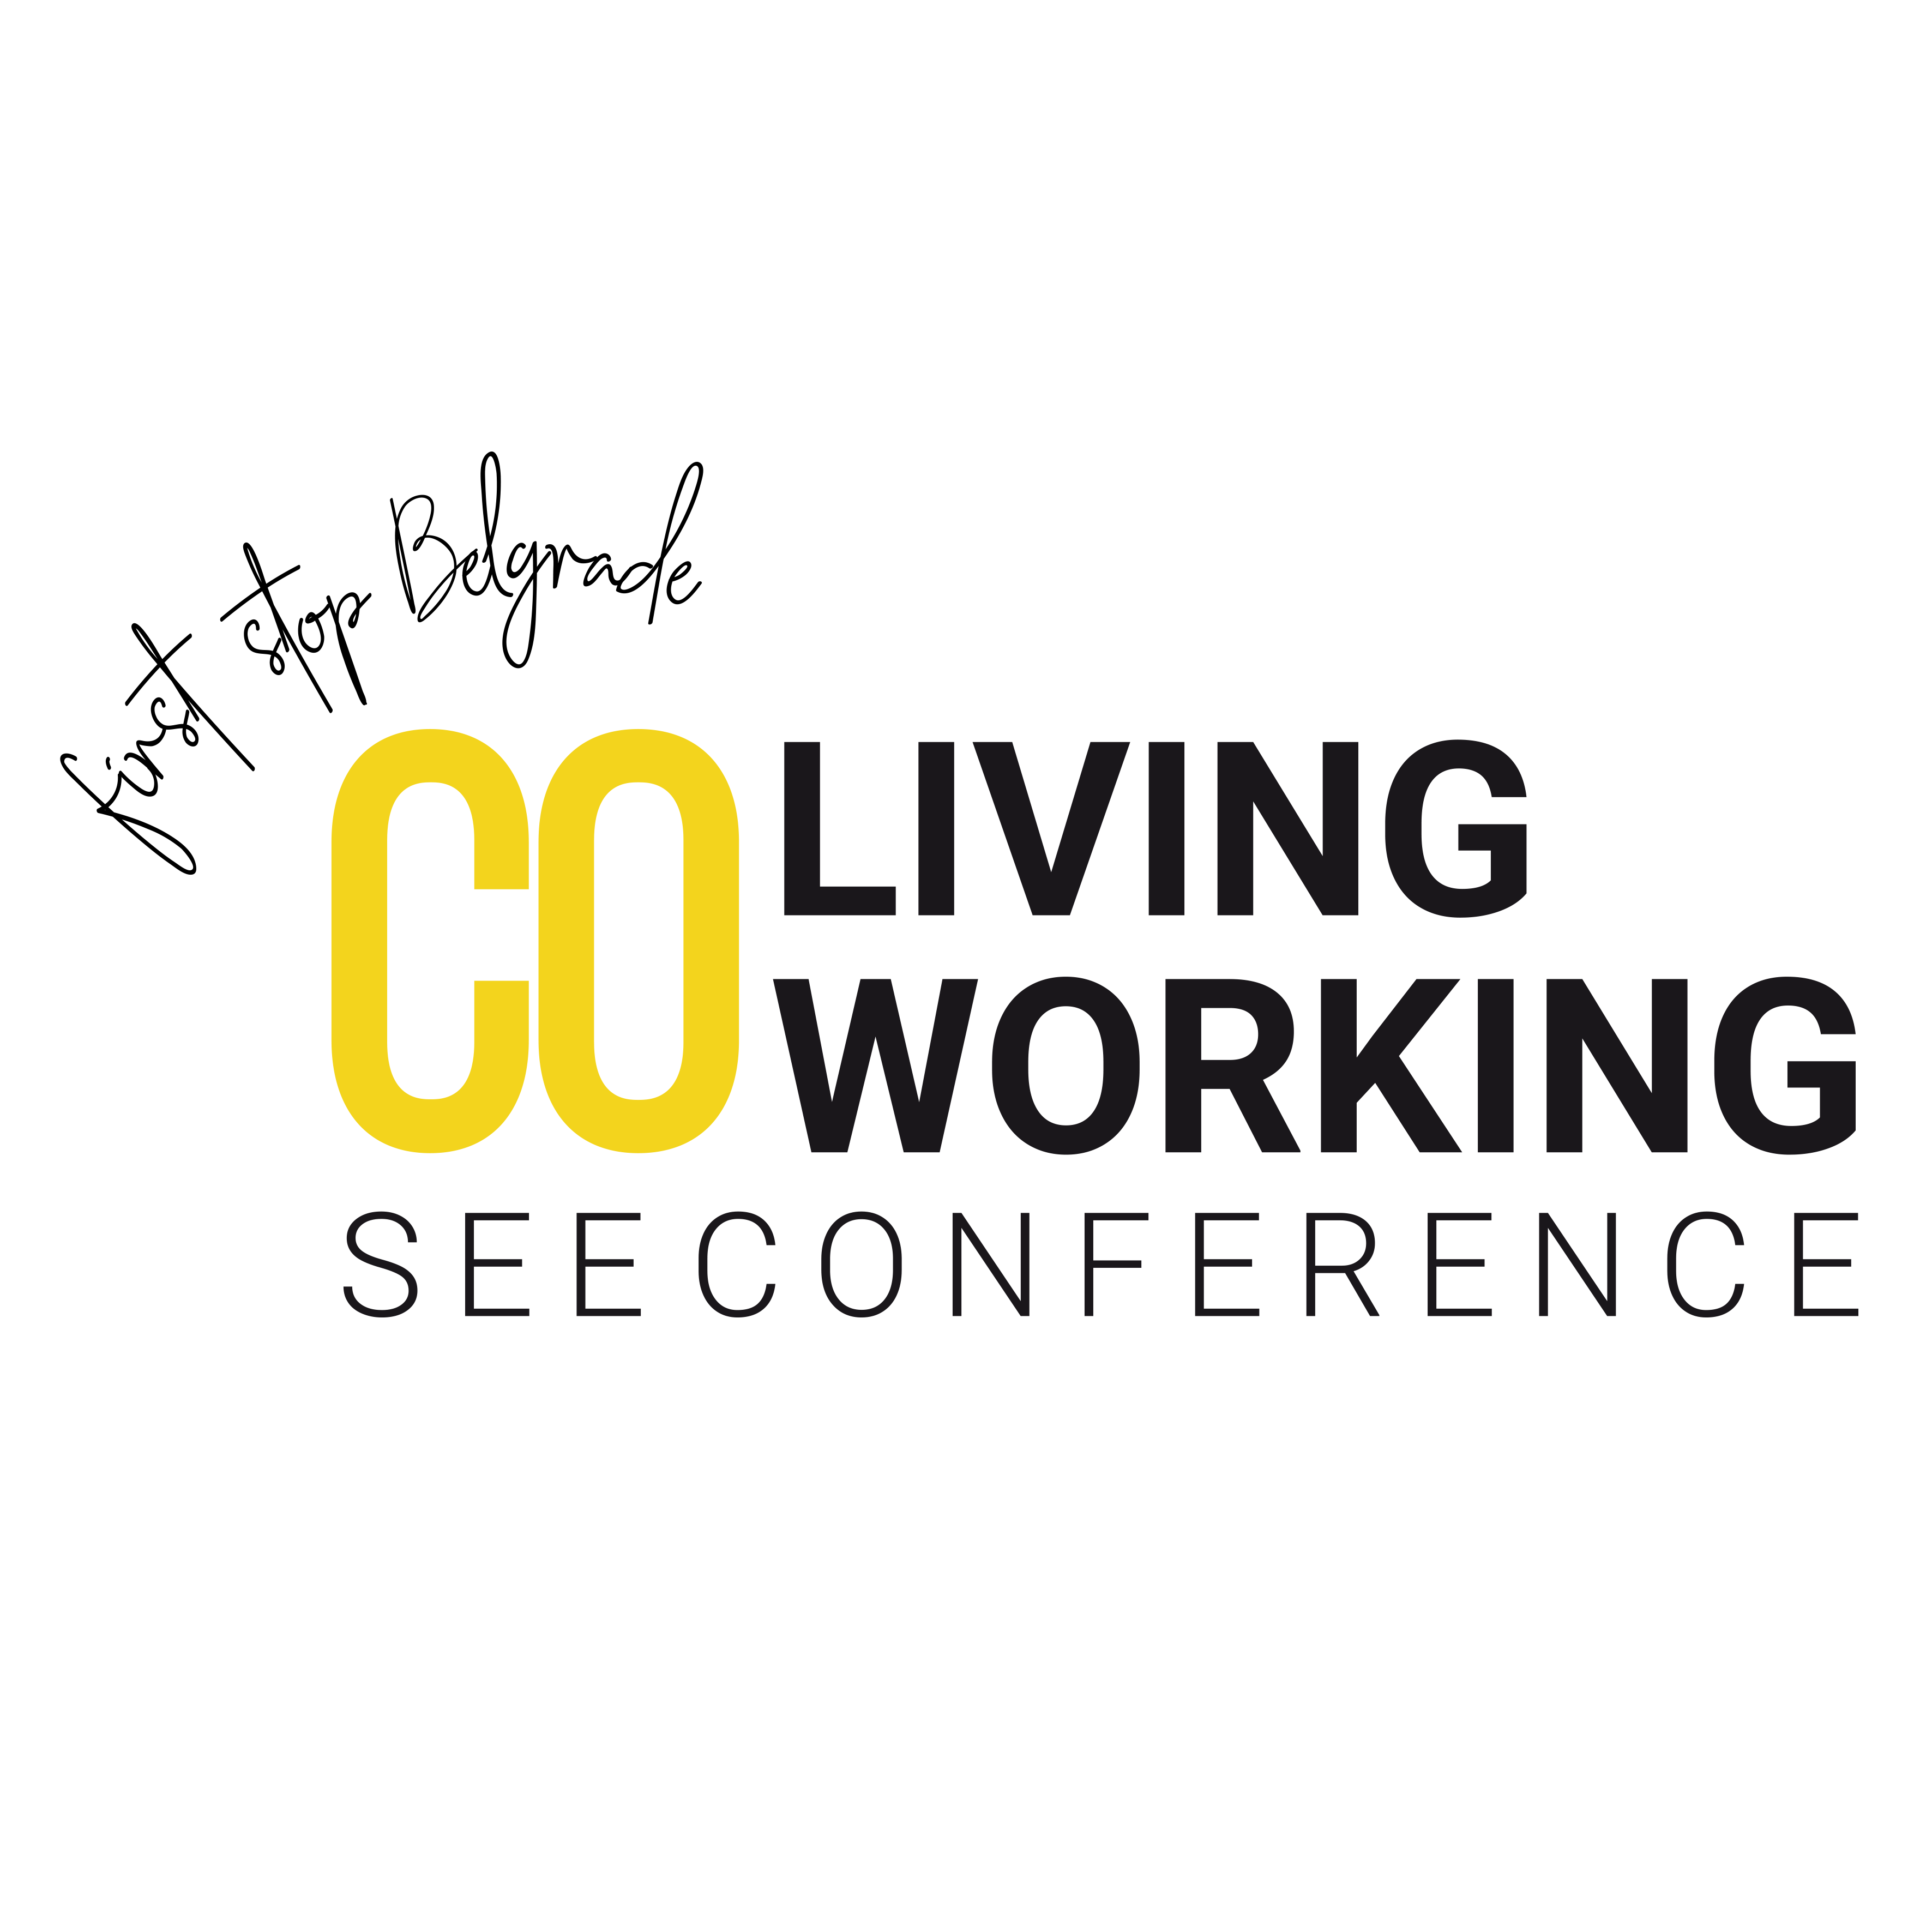 SERBIA IS HOSTING THE FIRST COWORKING AND COLIVING CONFERENCE IN SOUTH EAST EUROPE